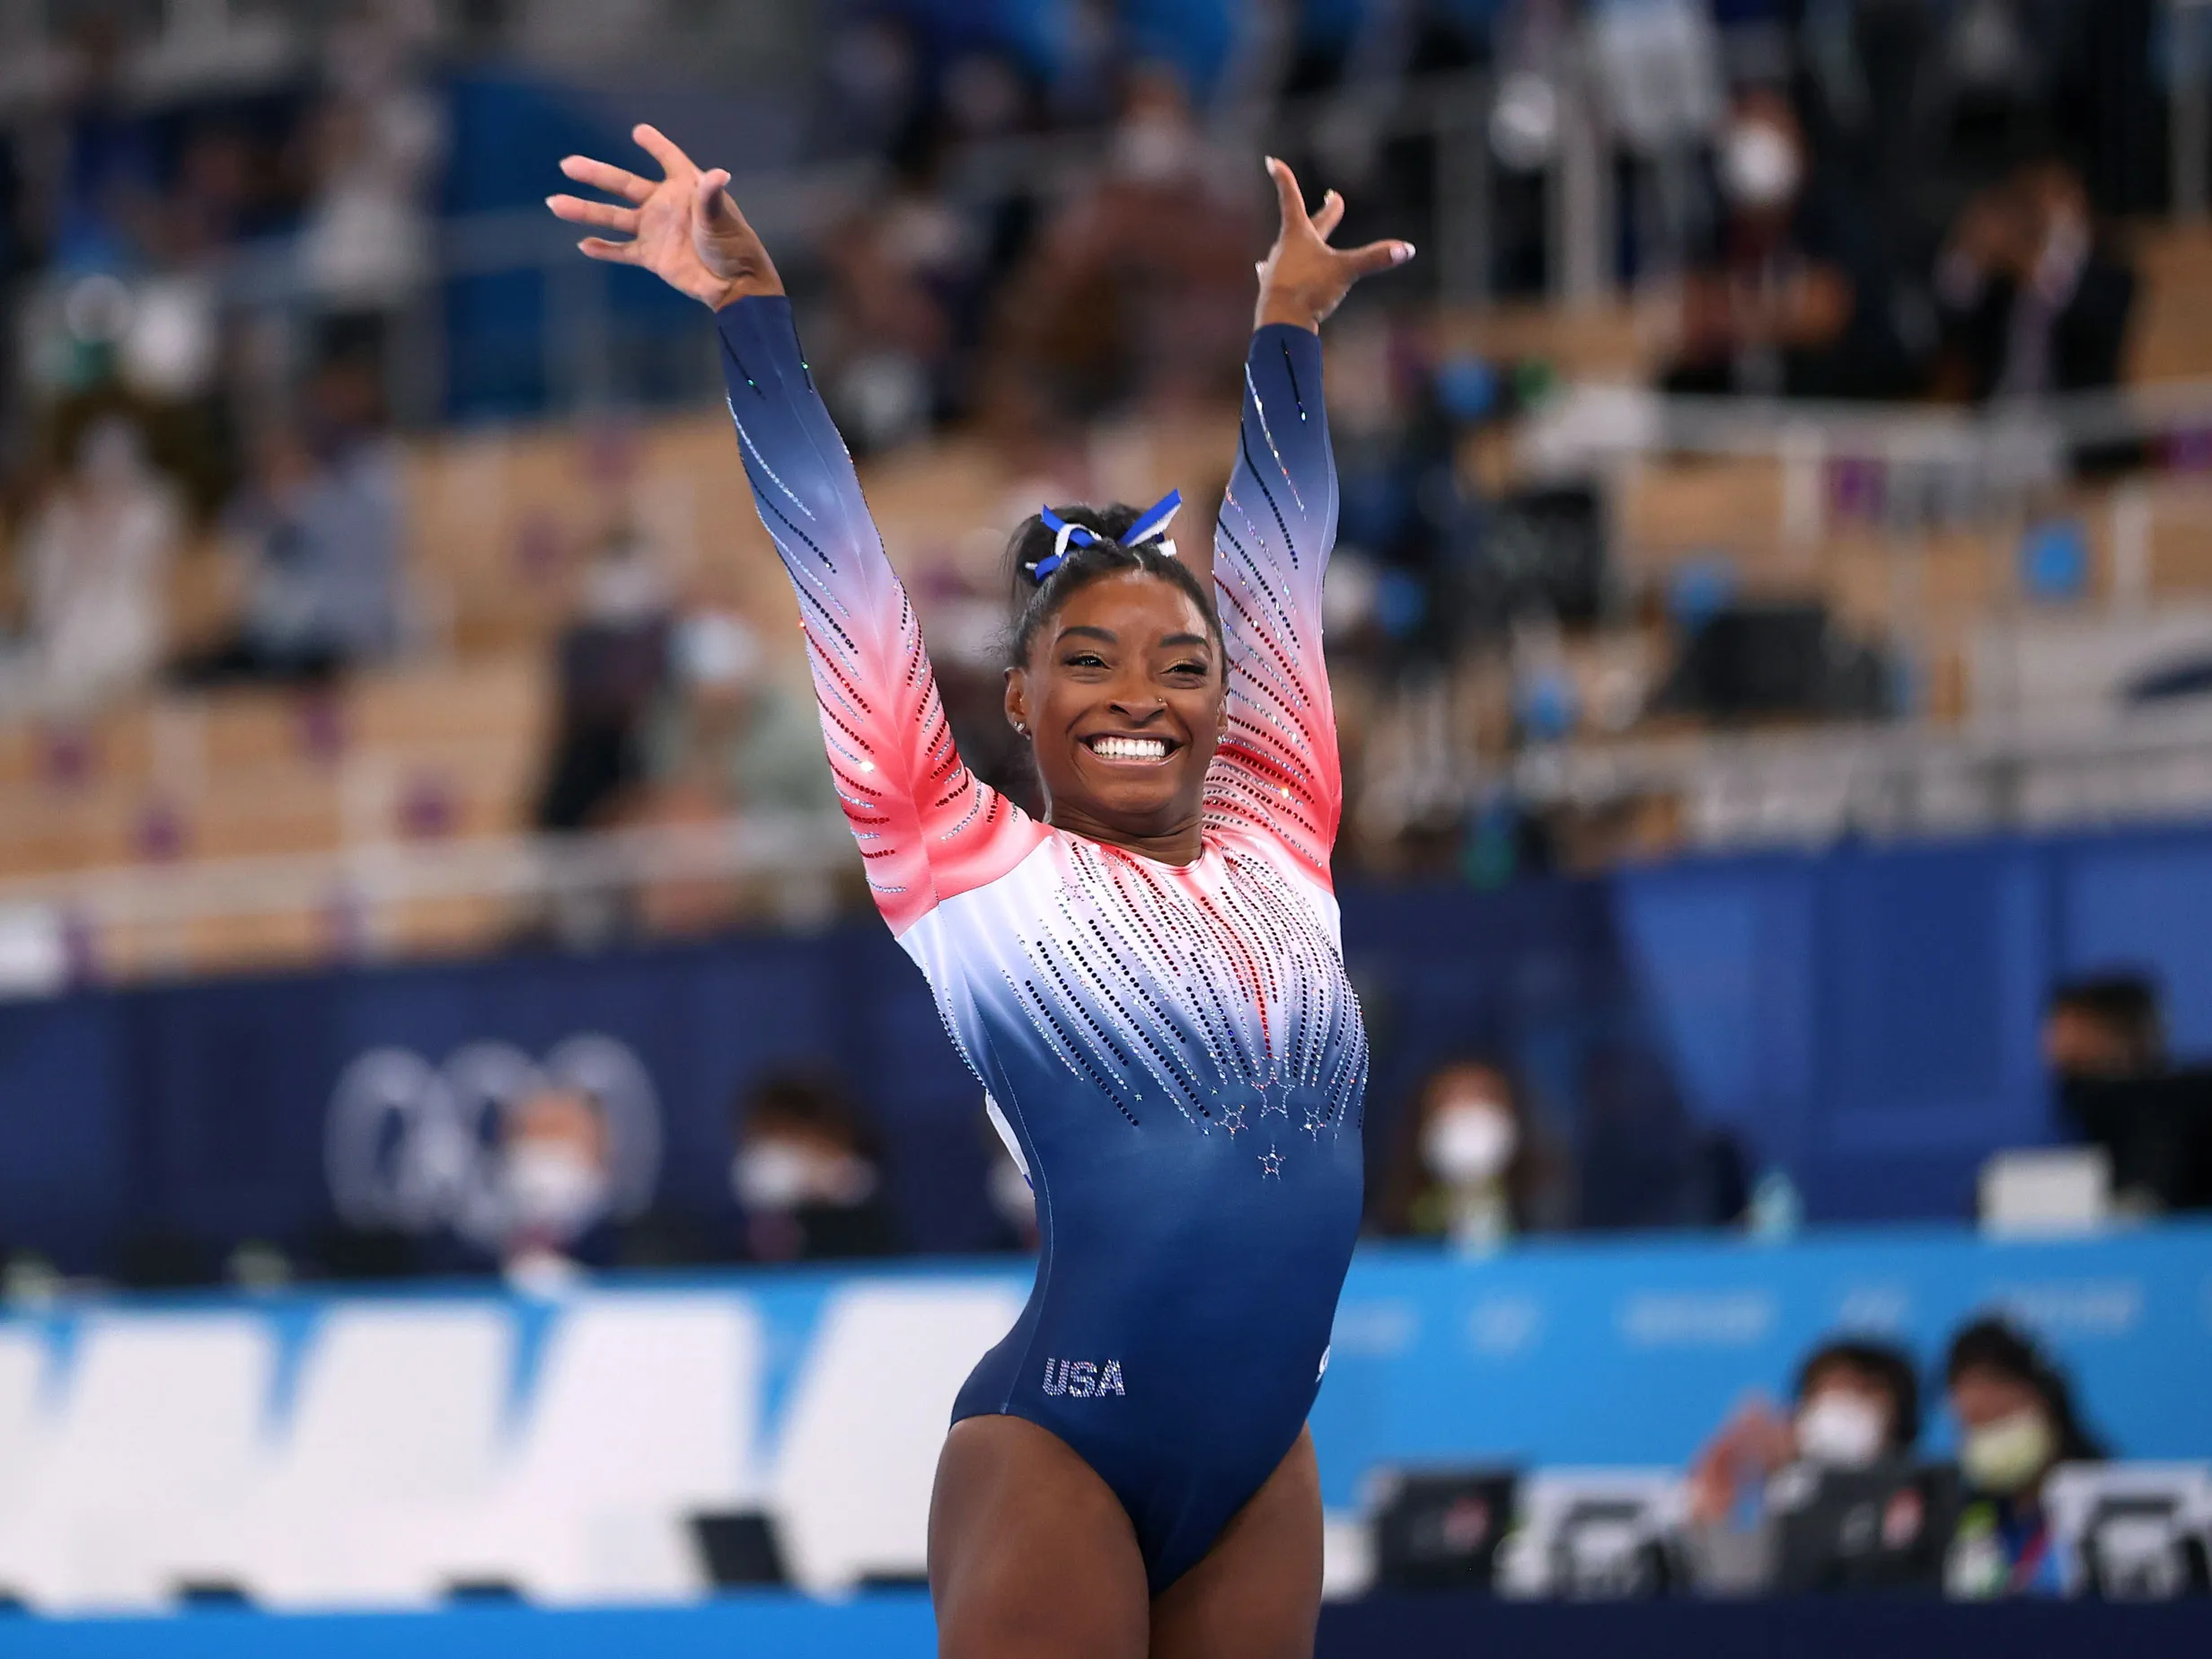 How many individual all-around titles has Simone Biles won at the World Championships?